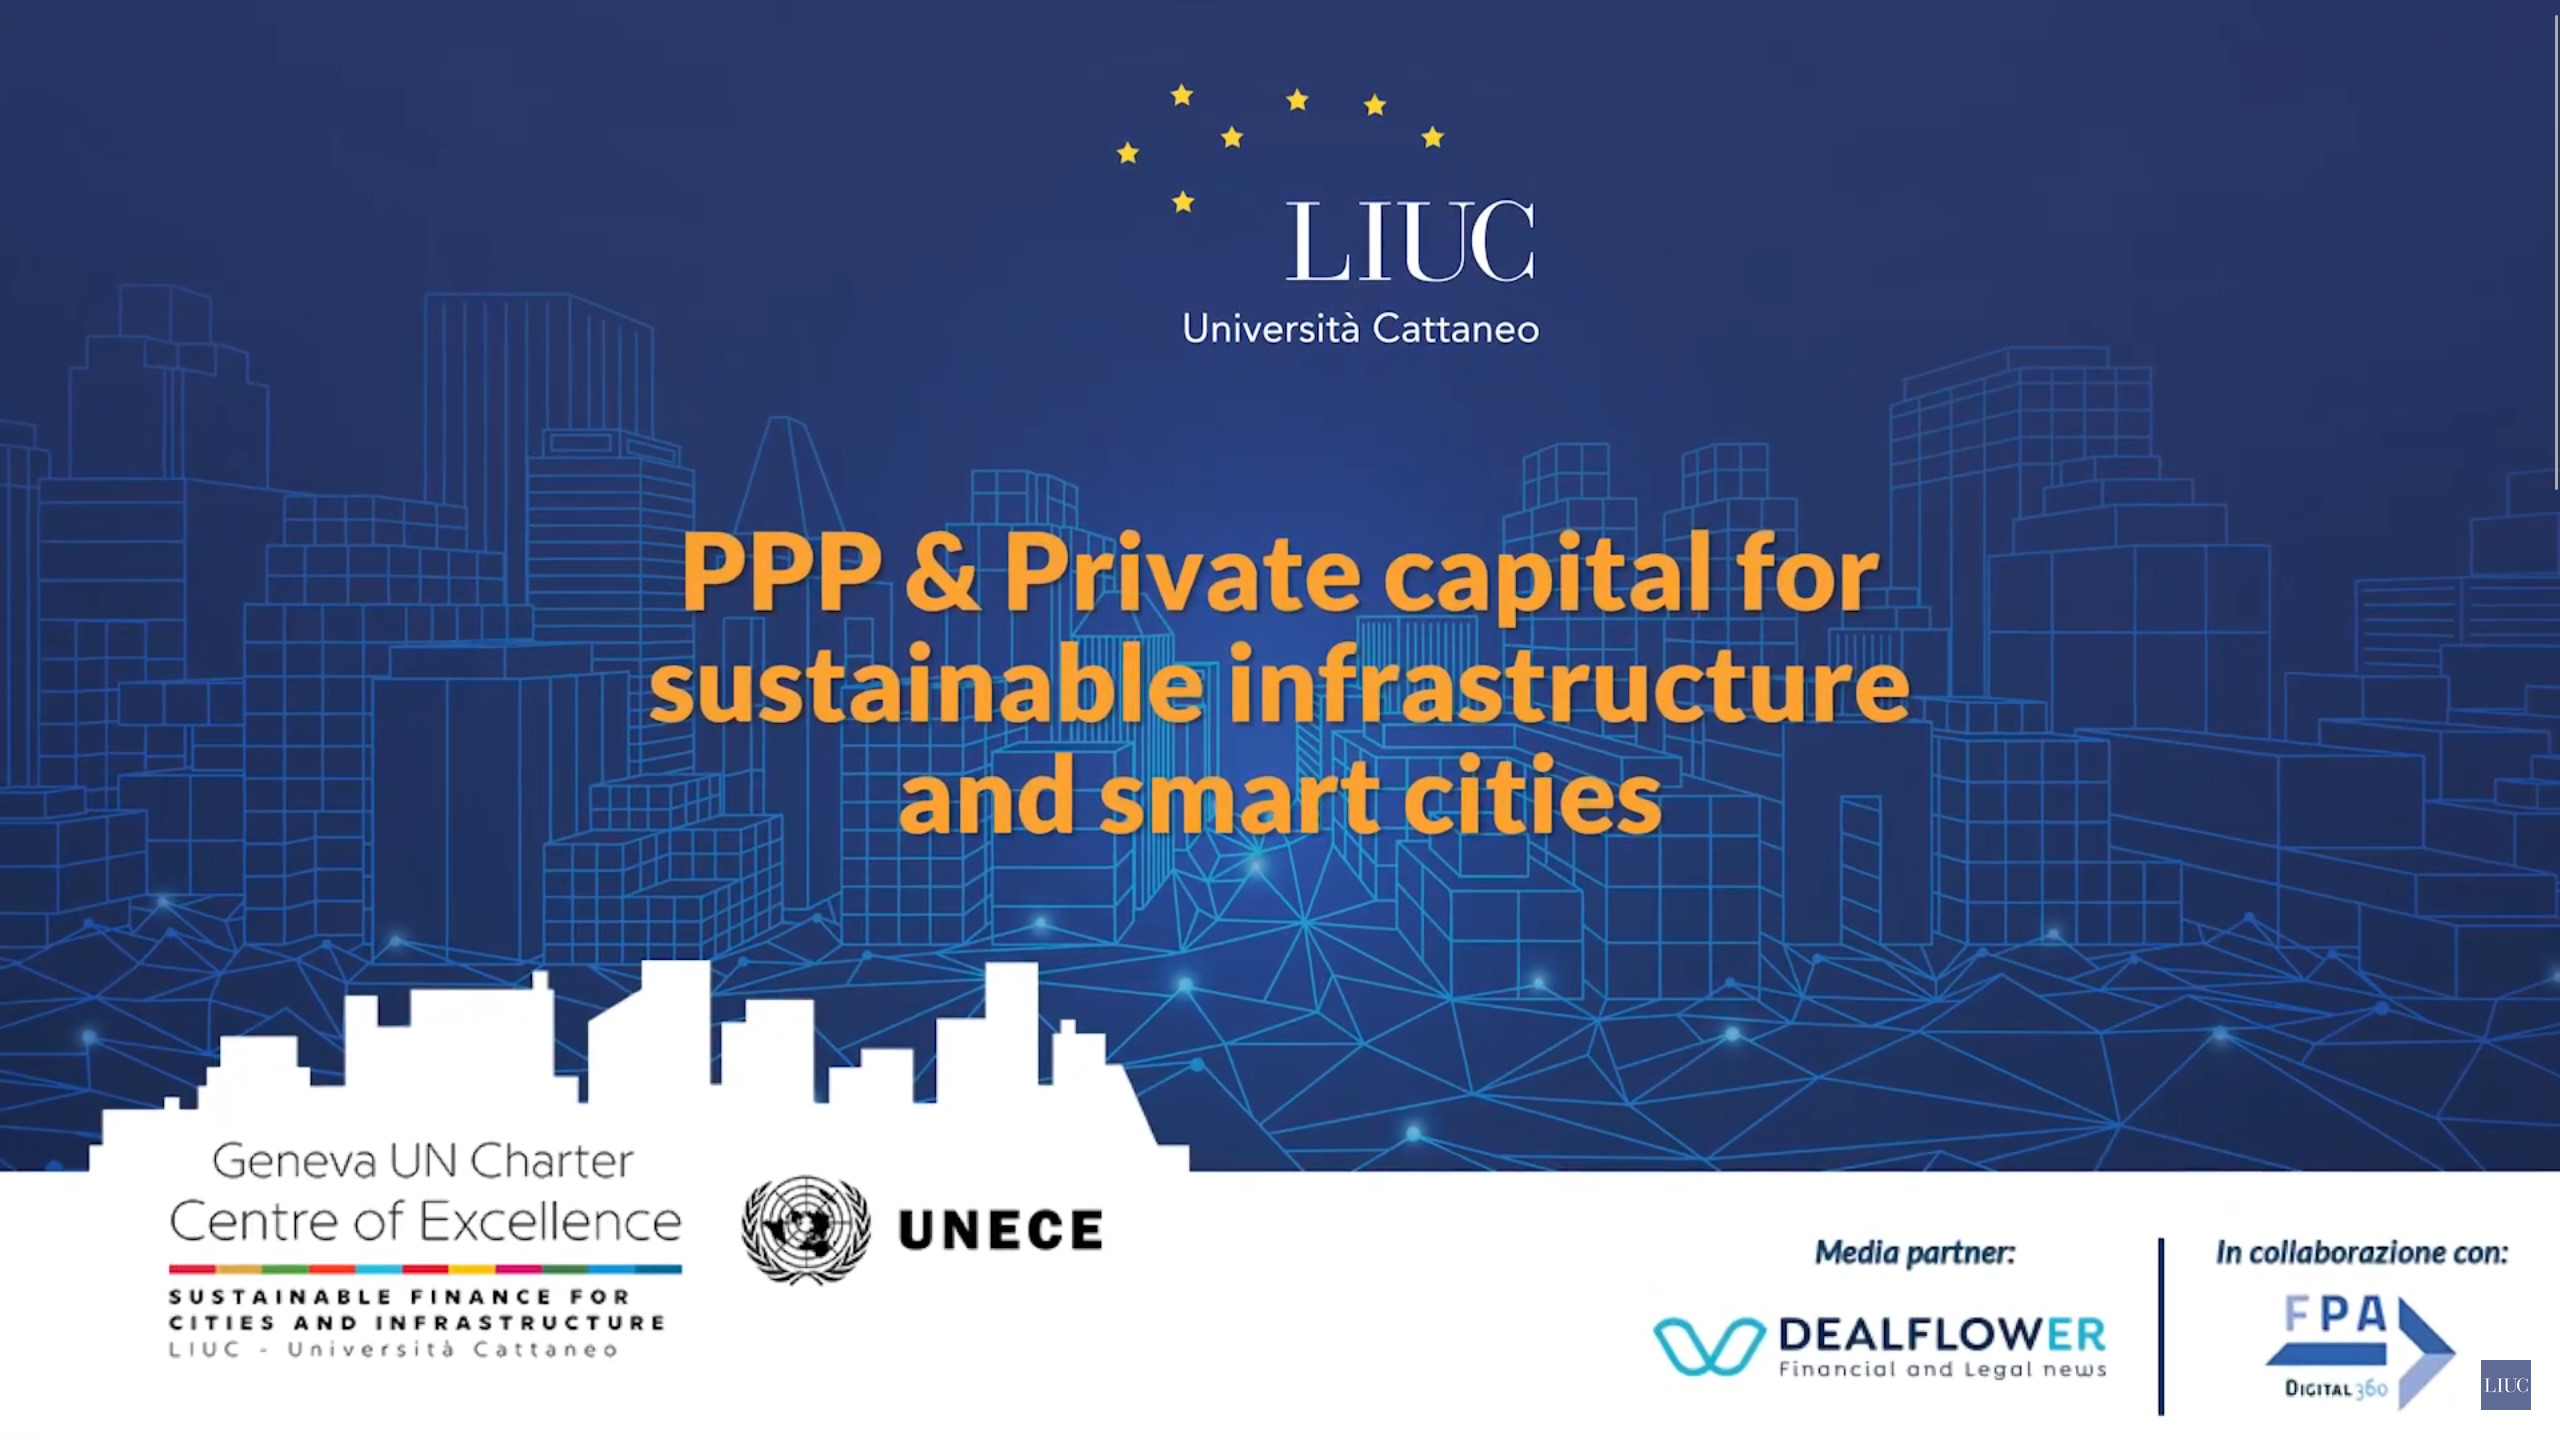 New infrastructure and alliances between public and private actors to promote a new concept of smart city